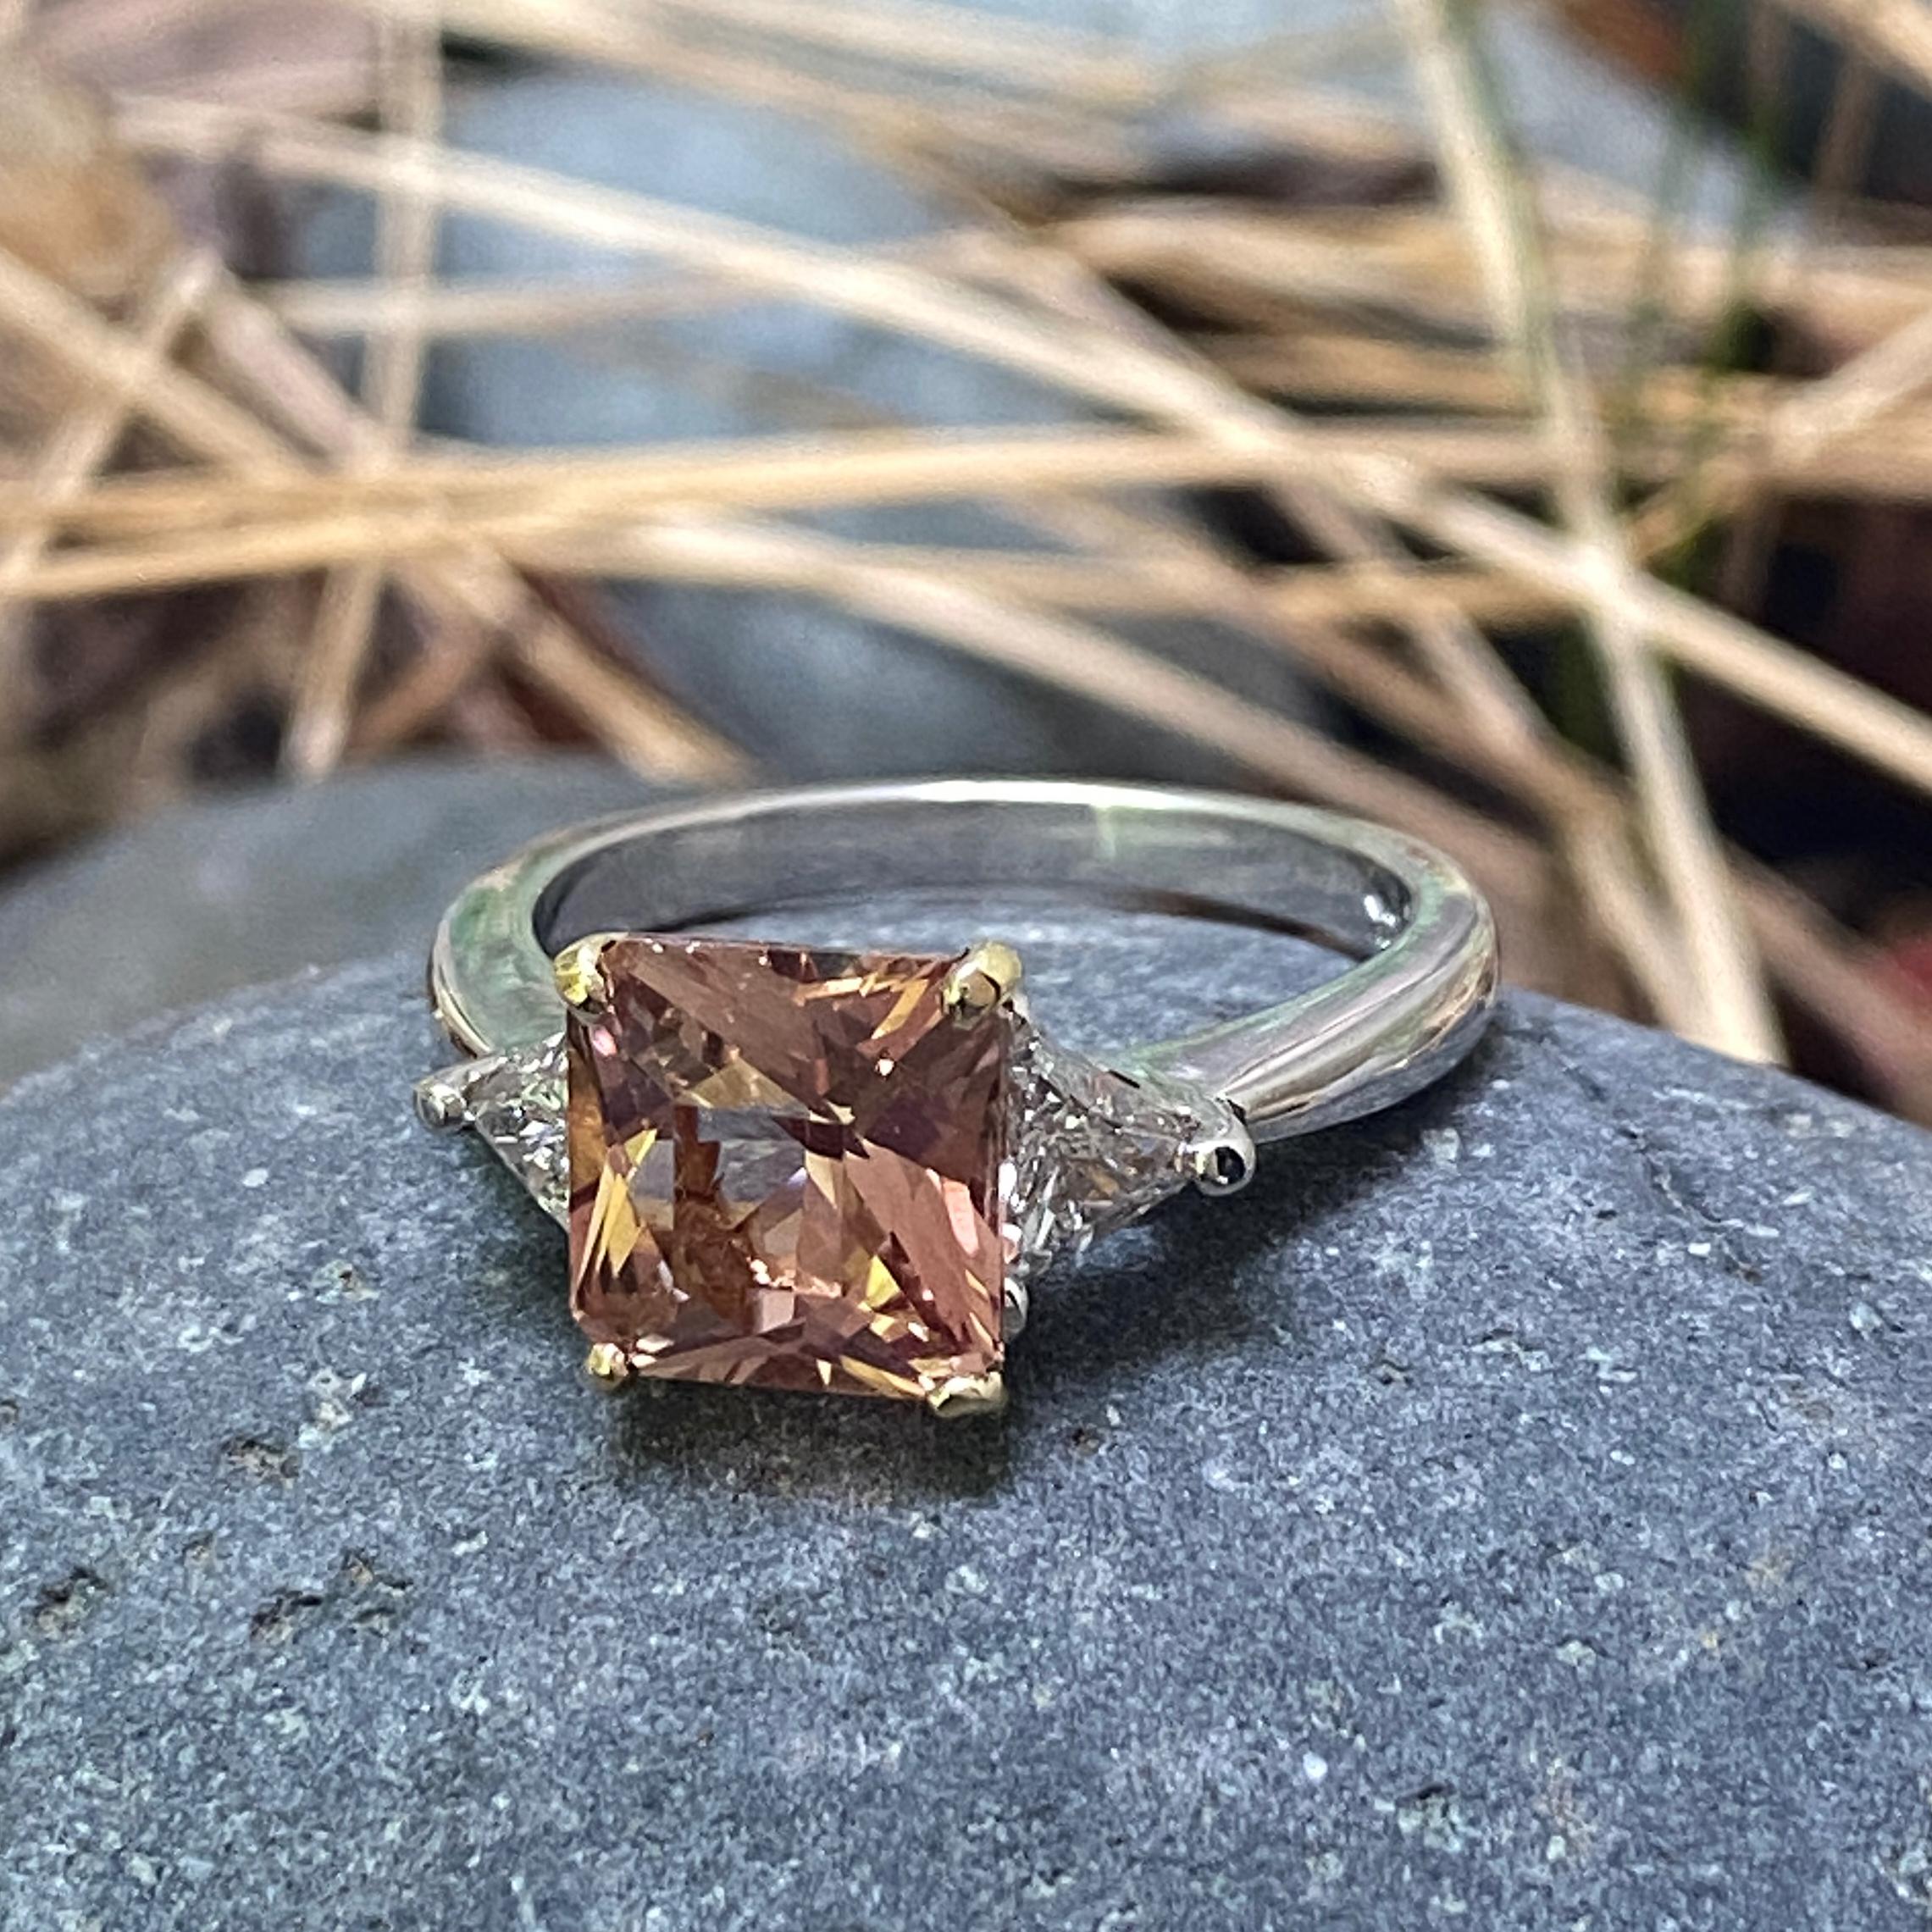 Two clean and bright, hard-to-find straight trillions gird a mixed cut Oregon Sunstone in this sleek platinum ring.  

This ring was originally set with a yellow diamond, so the center prong basket is deep yellow 18 karat yellow gold instead of